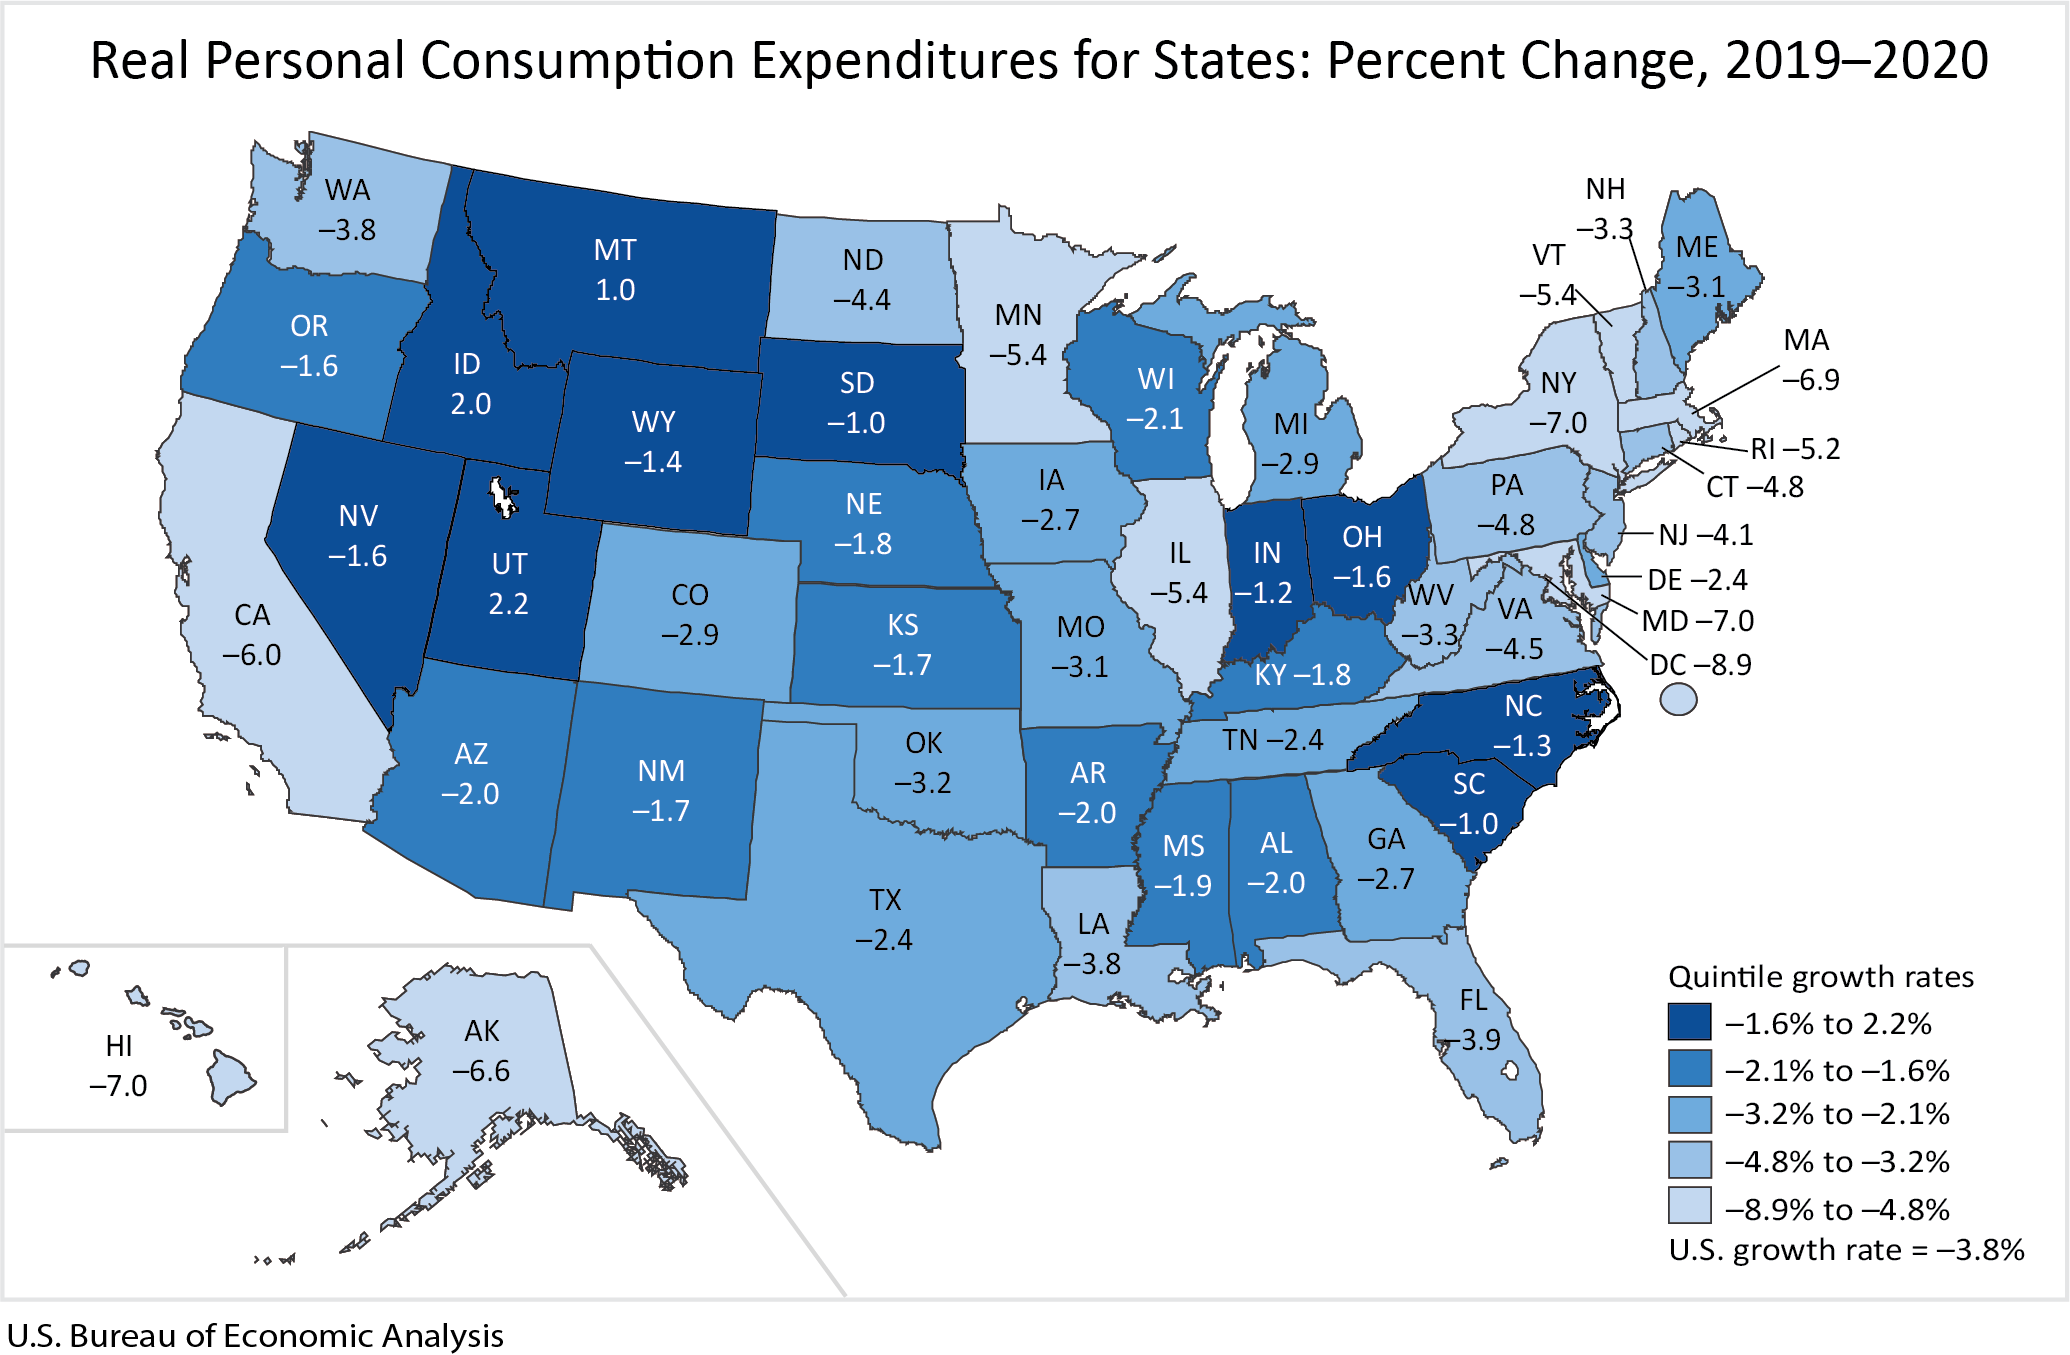 Real Personal Consumption Expenditures for States: Percent Change, 2019-2020